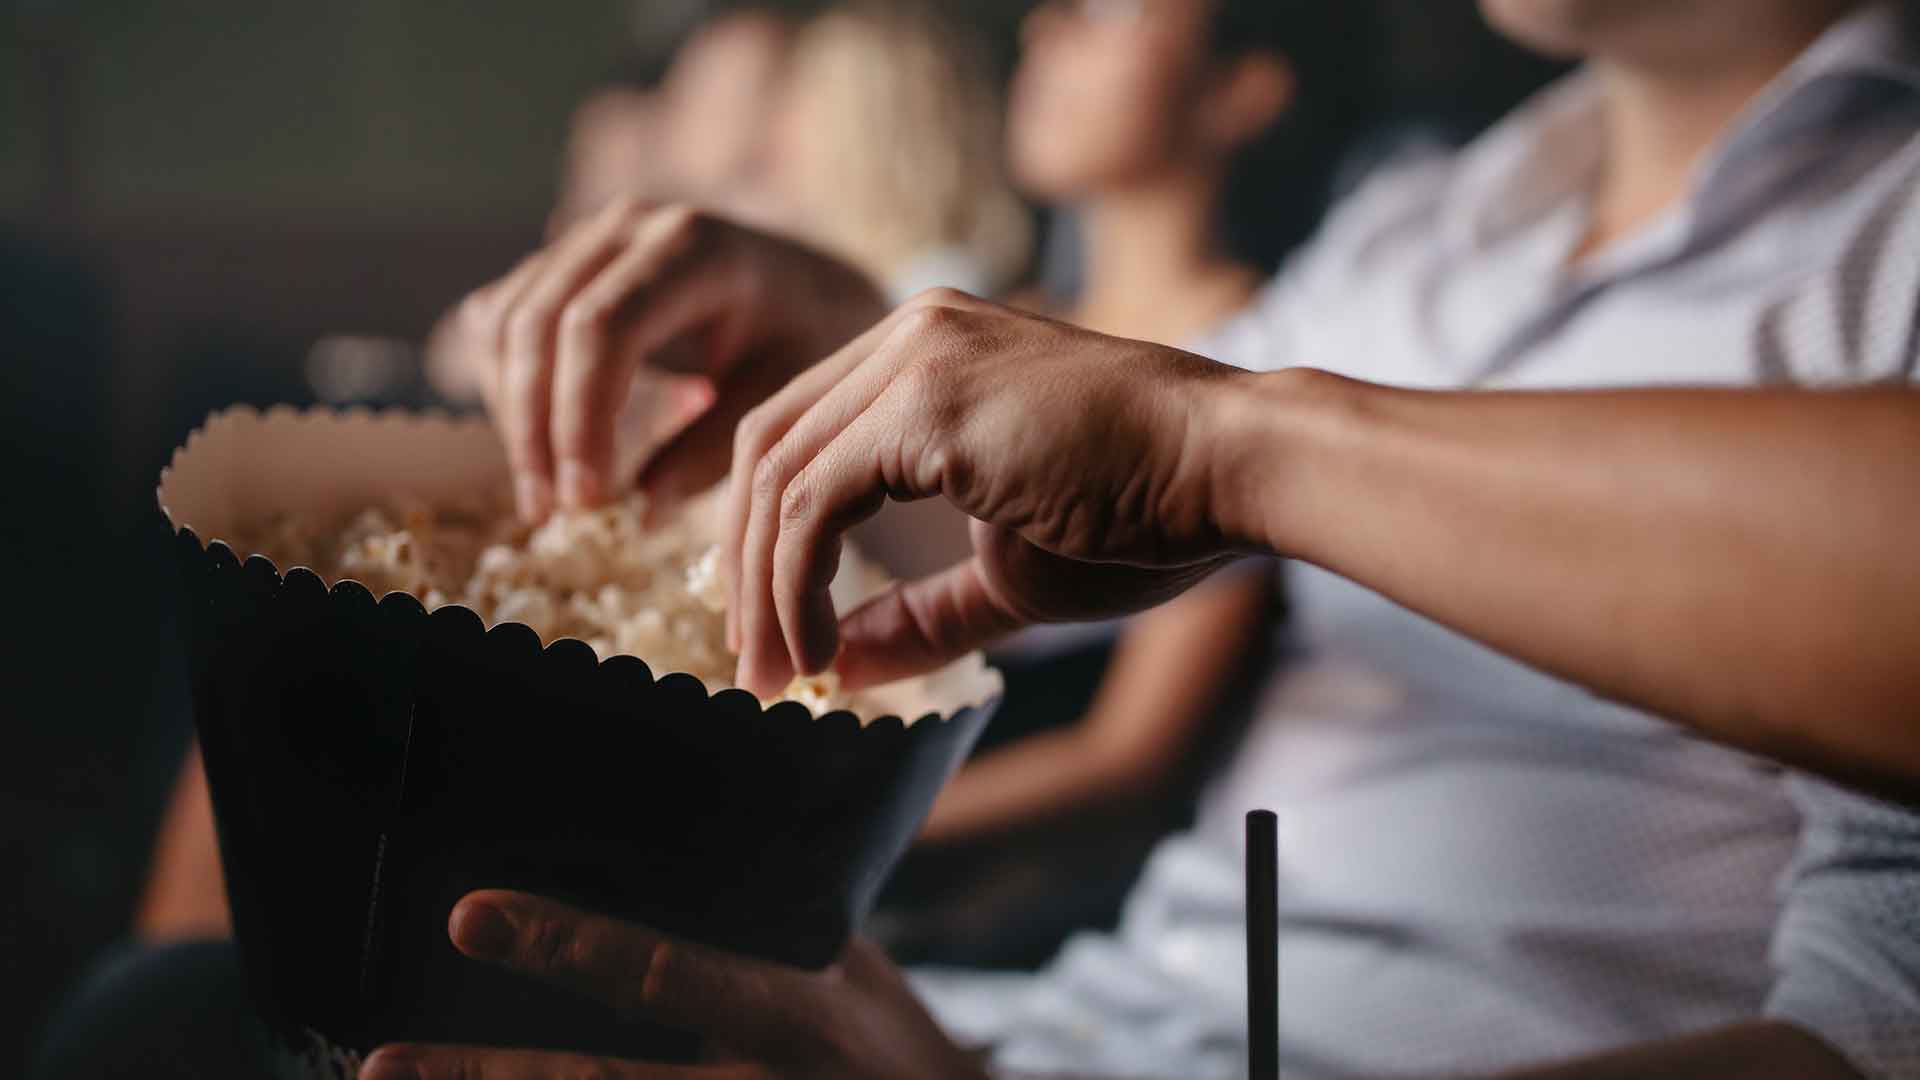 Several people eating popcorn in a movie theatre.